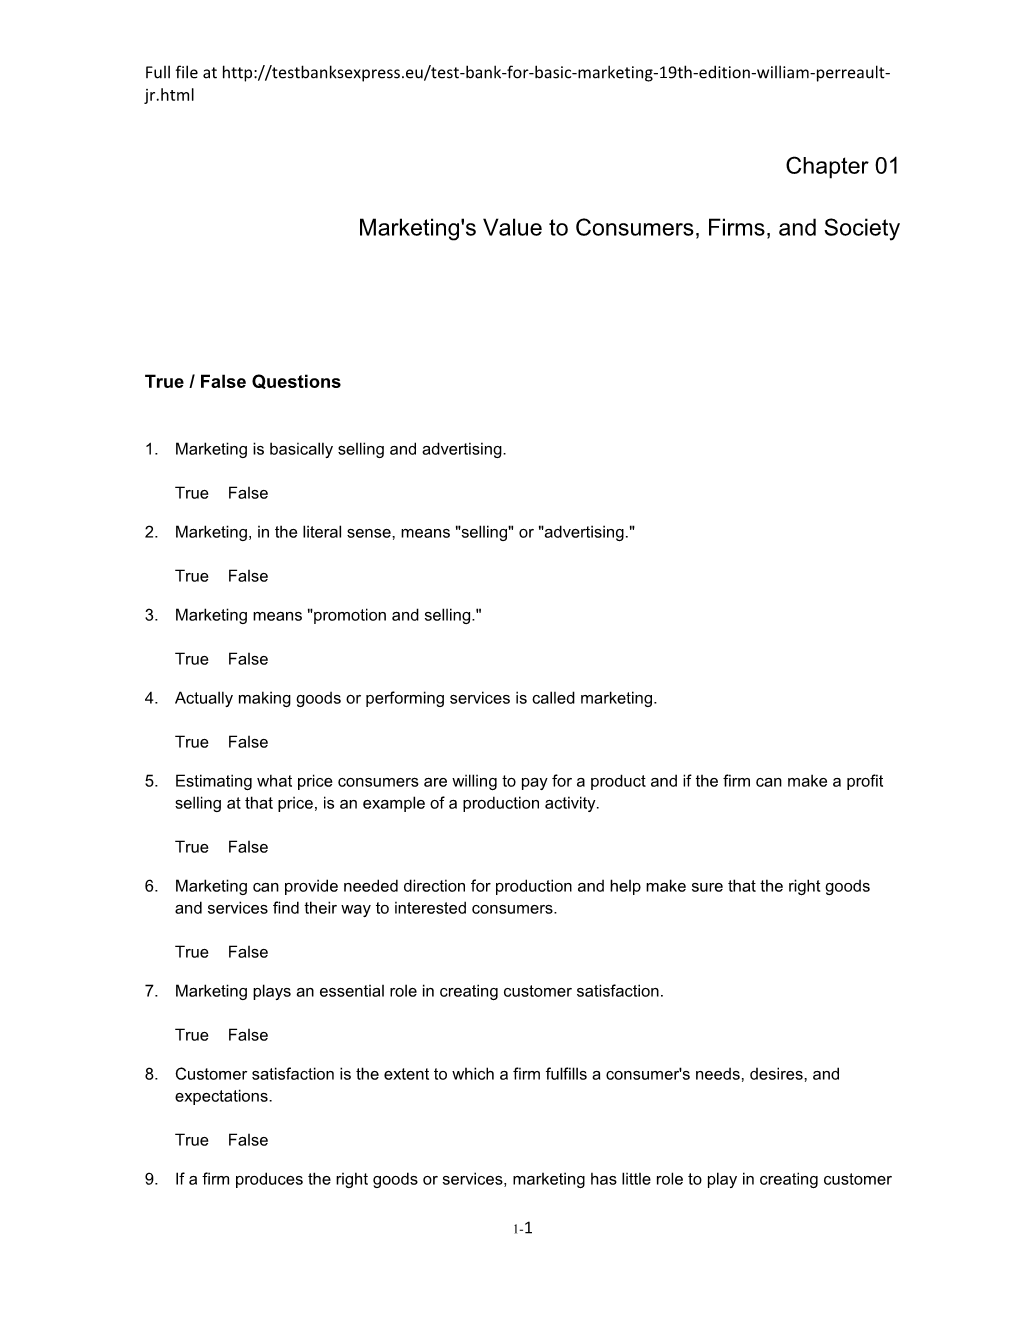 Marketing's Value to Consumers, Firms, and Society s1